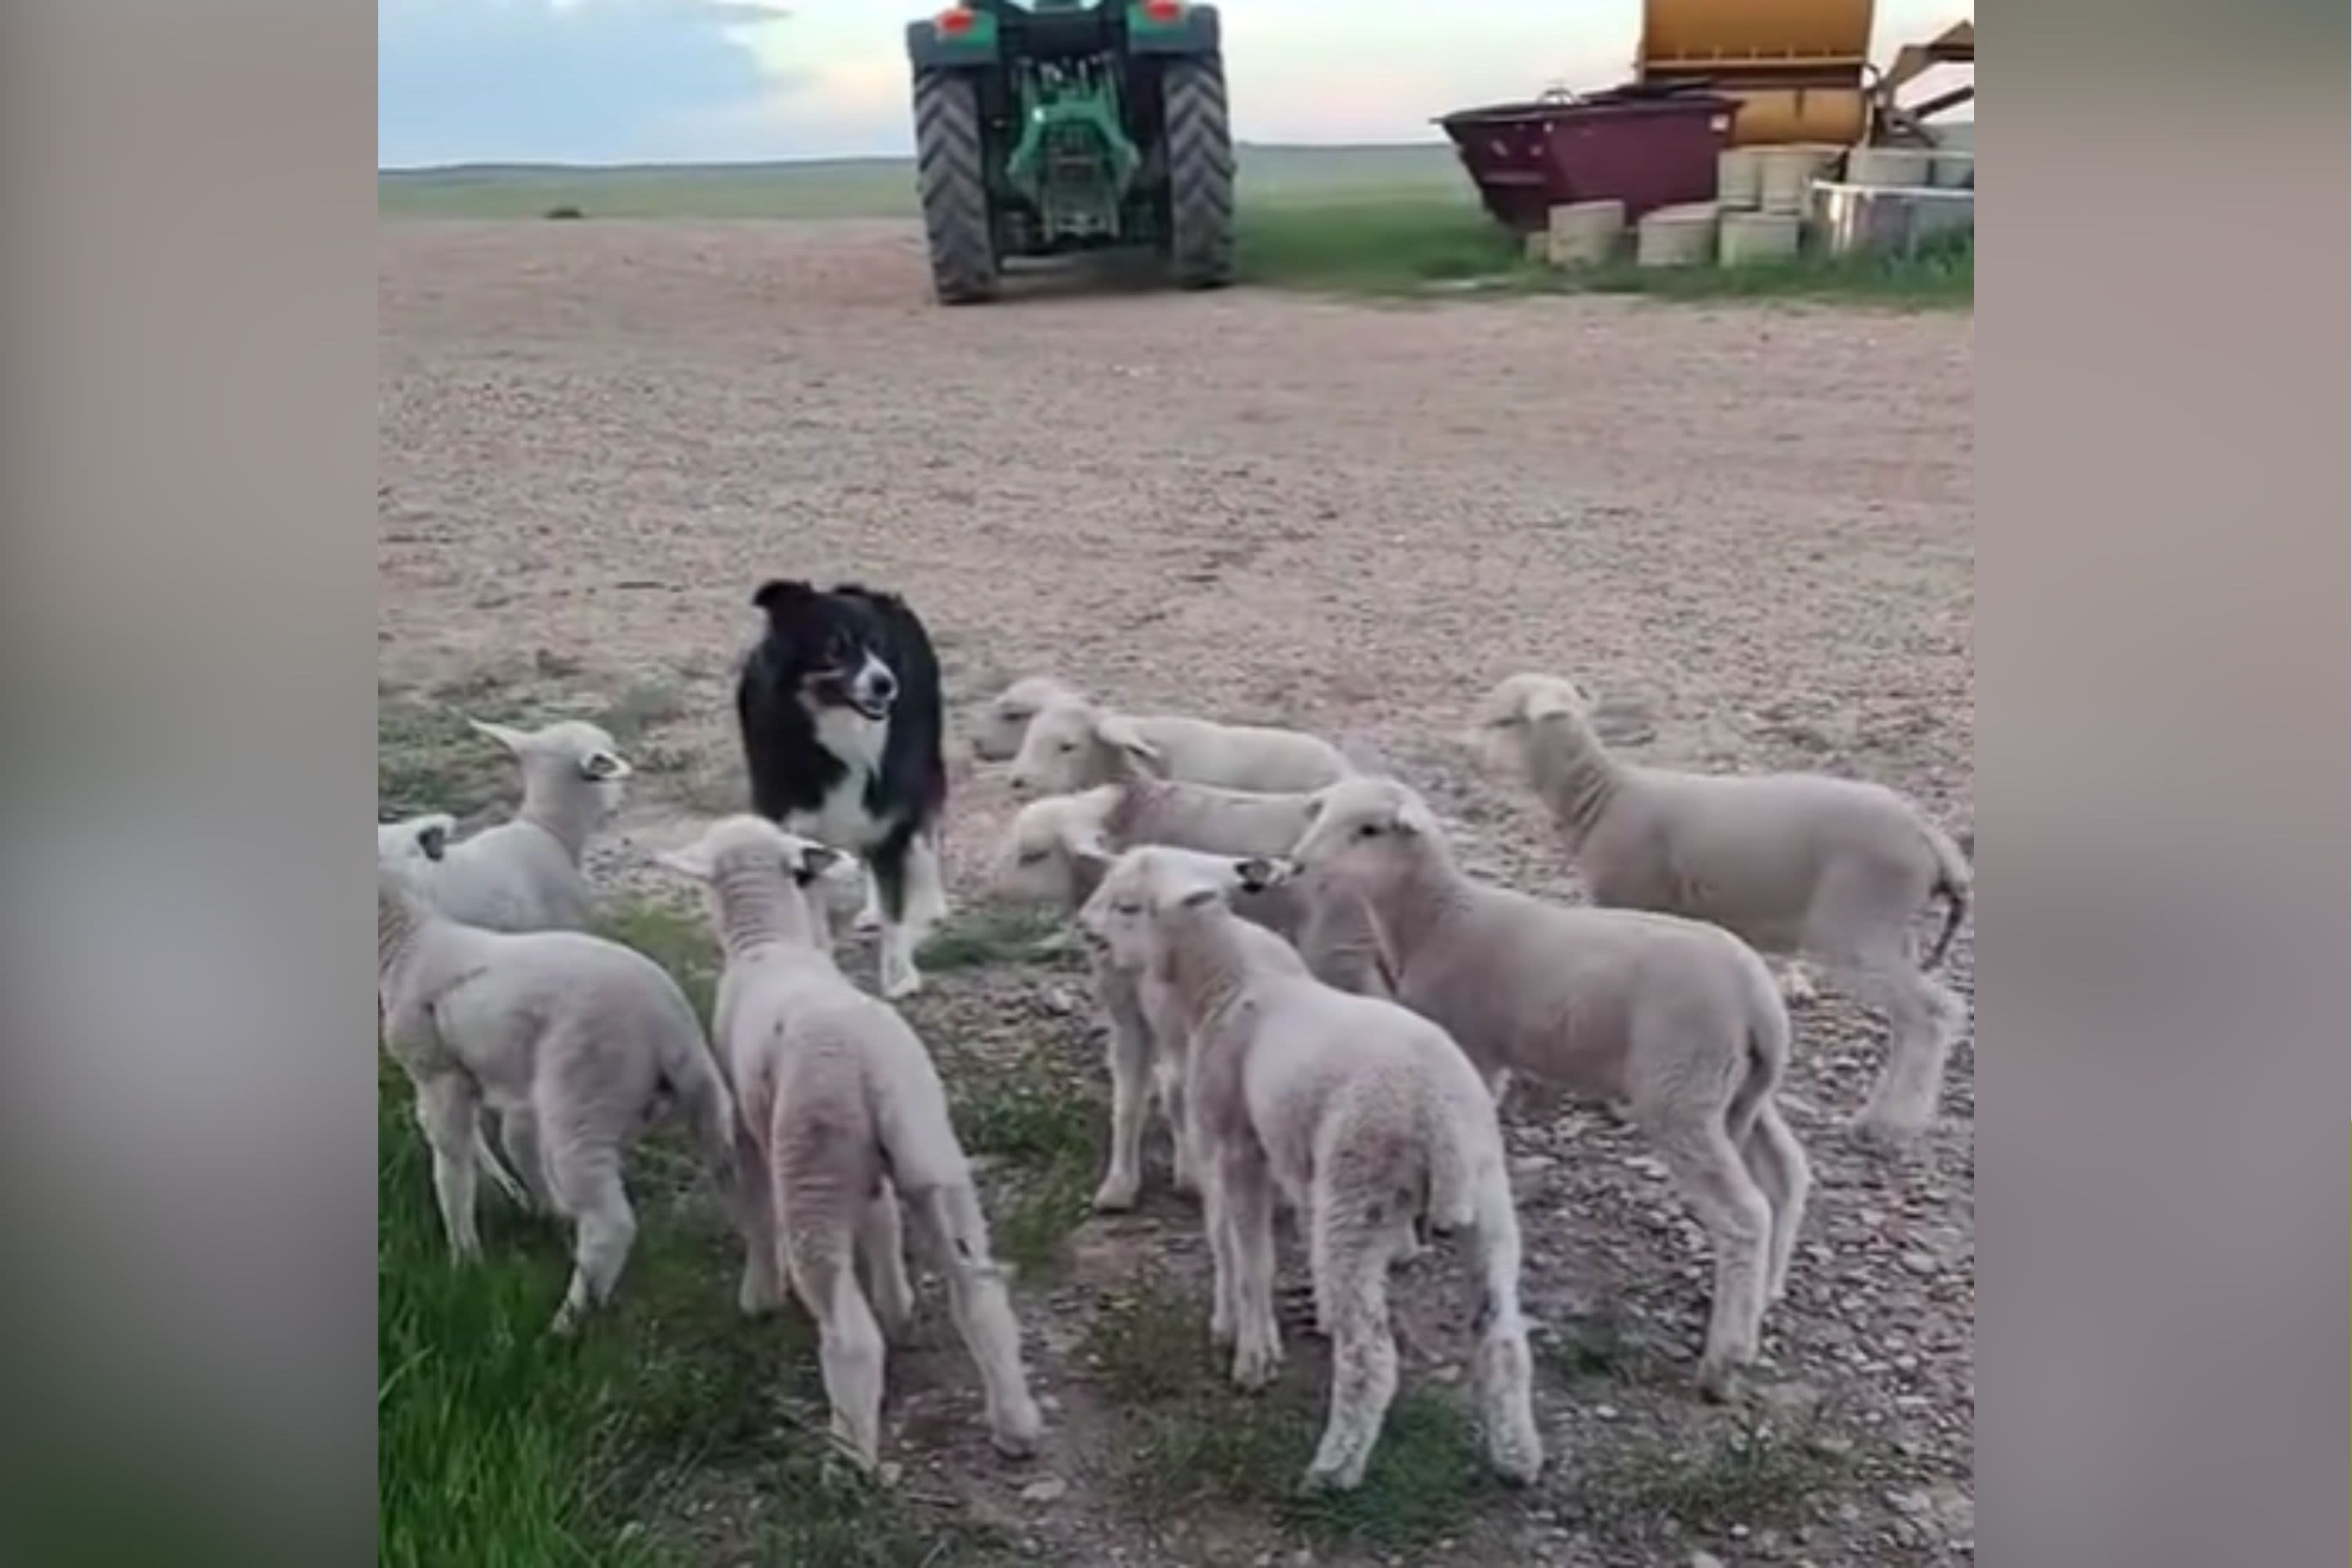 Internet in stitches at how border collie herds lambs with "zero effort"